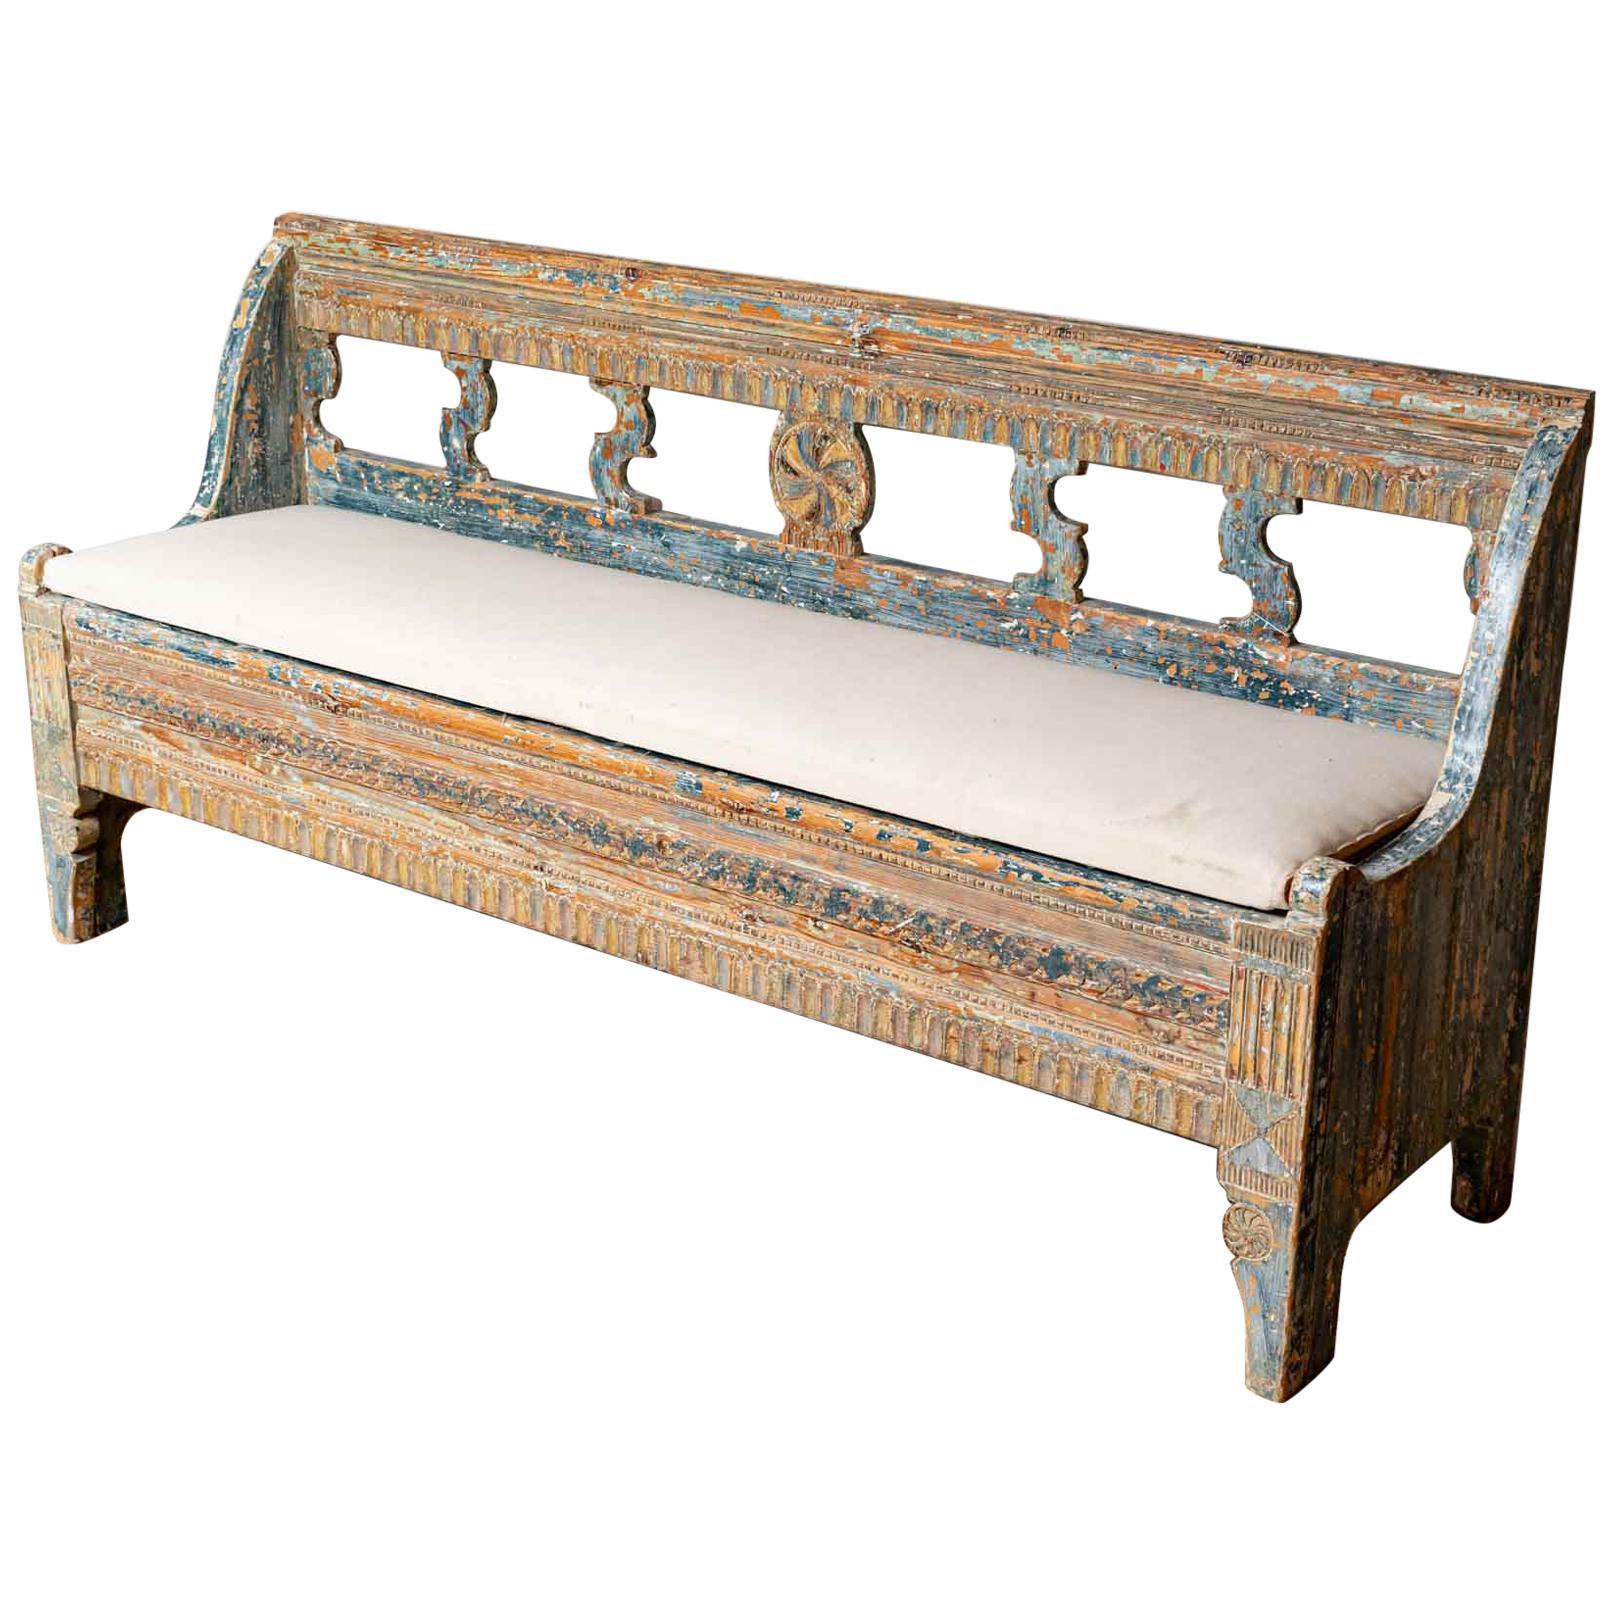 18th Century Norwegian Storage Bench with Carved Back Detail and Original Paint